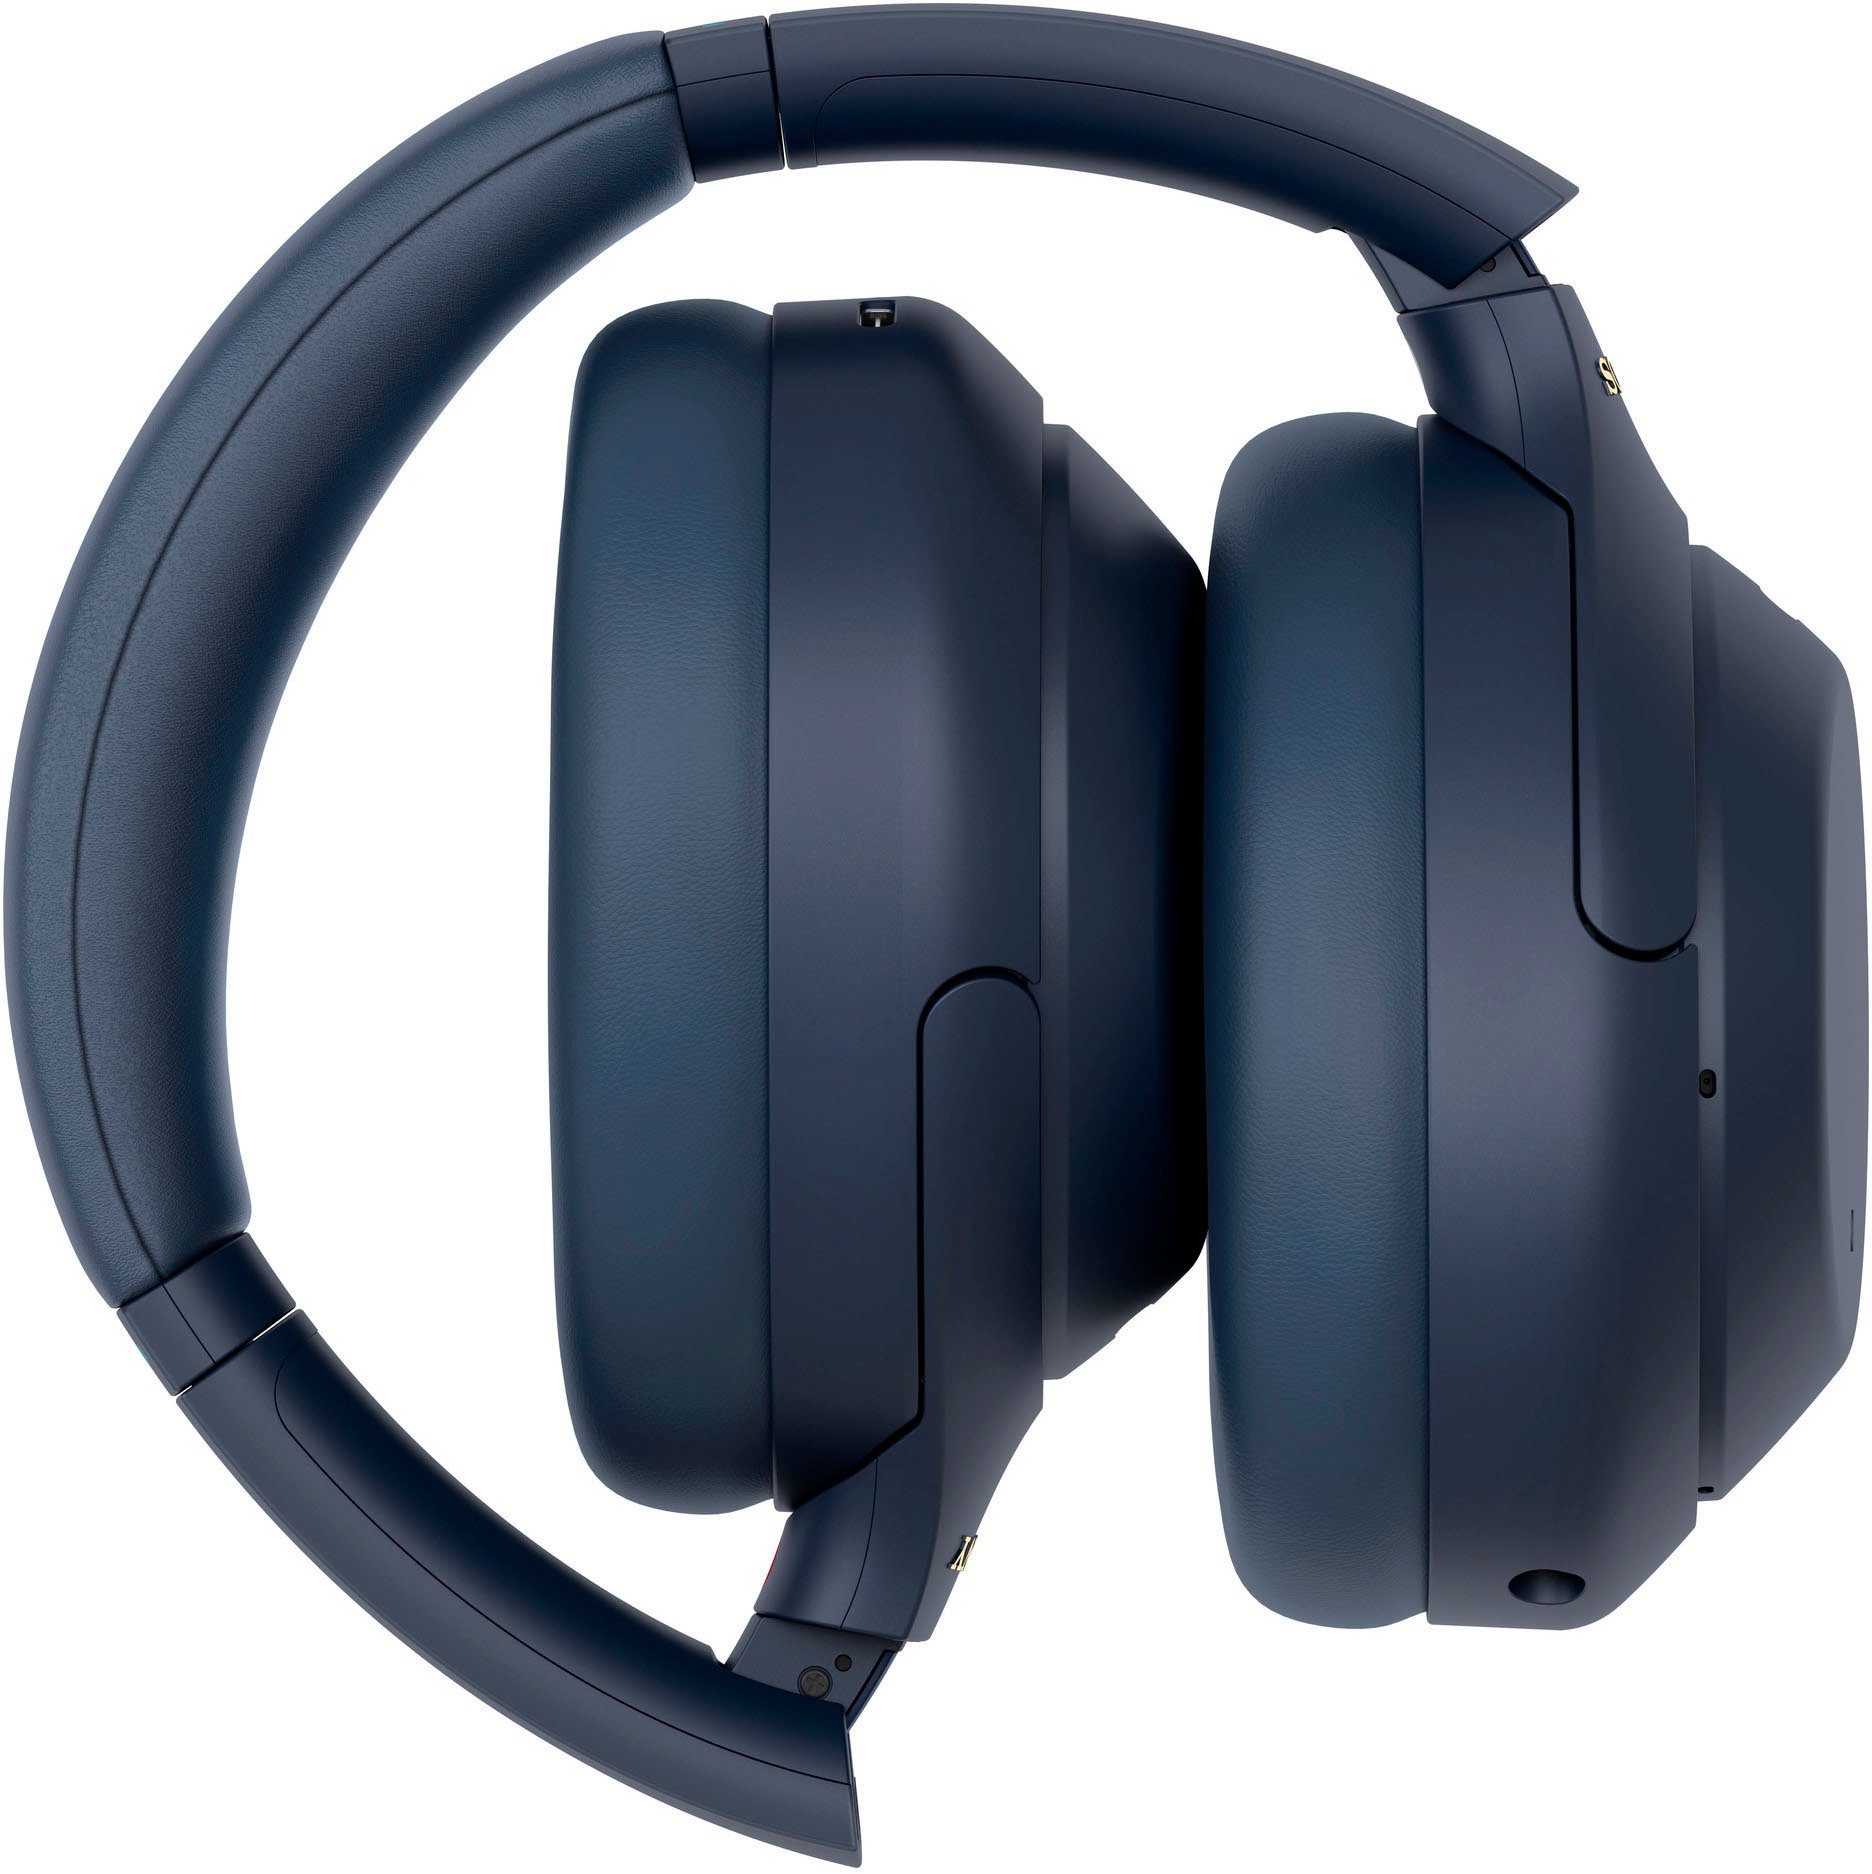 kabelloser One-Touch Sony WH-1000XM4 Verbindung Over-Ear-Kopfhörer via Schnellladefunktion) (Noise-Cancelling, Touch Bluetooth, NFC, NFC, Sensor, blau